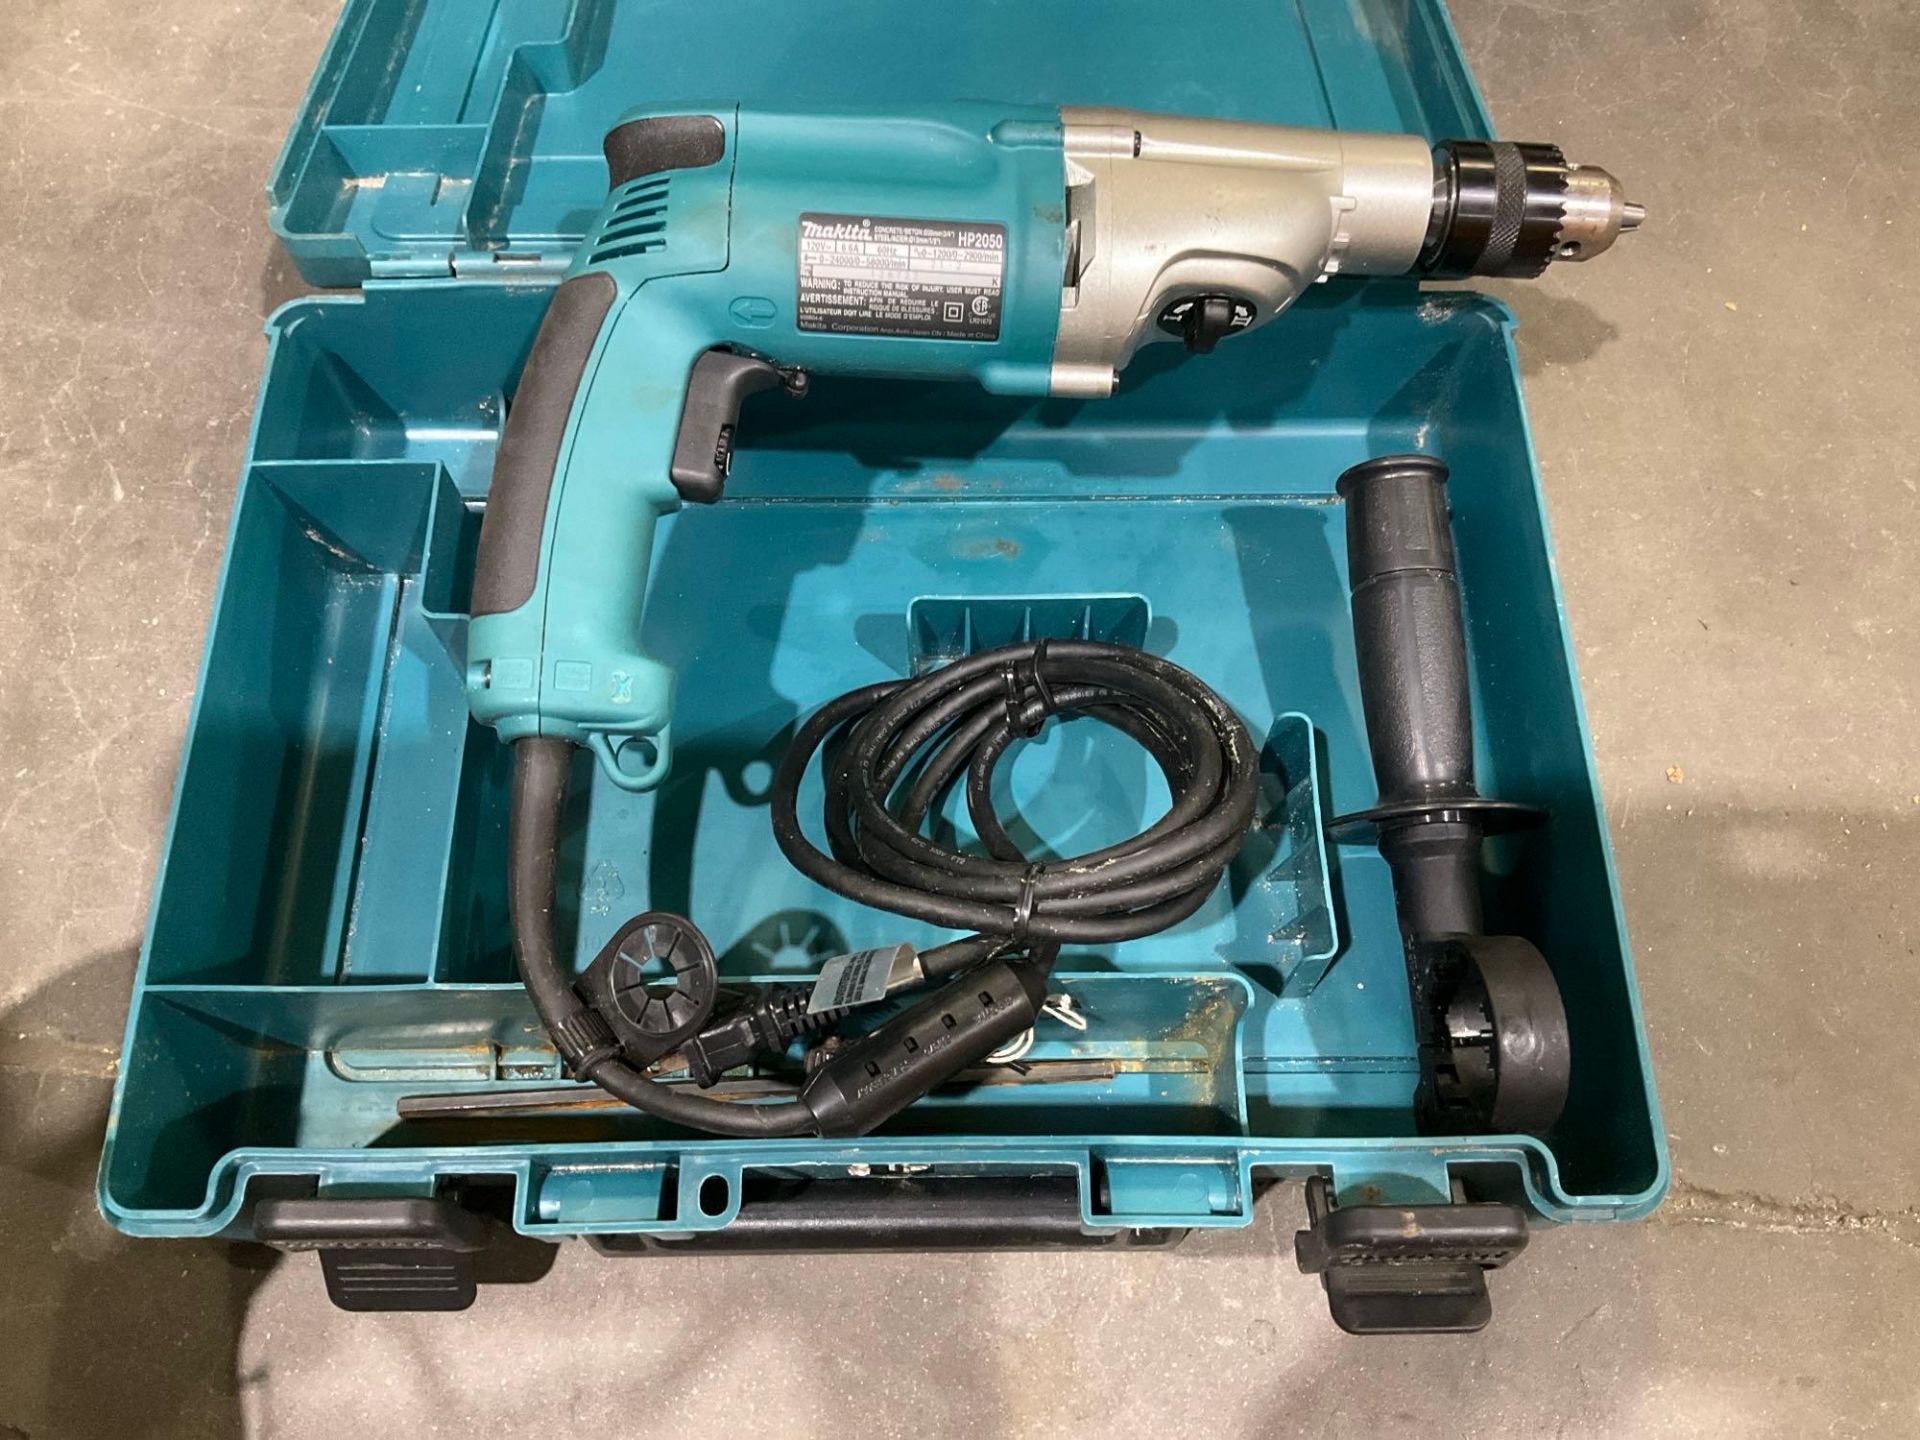 MAKITA 2 SPEED HAMMER DRILL MODEL HP2050 WITH CARRYING CASE , 120VOLTS, 6.6A, RECONDITIONED - Bild 2 aus 6